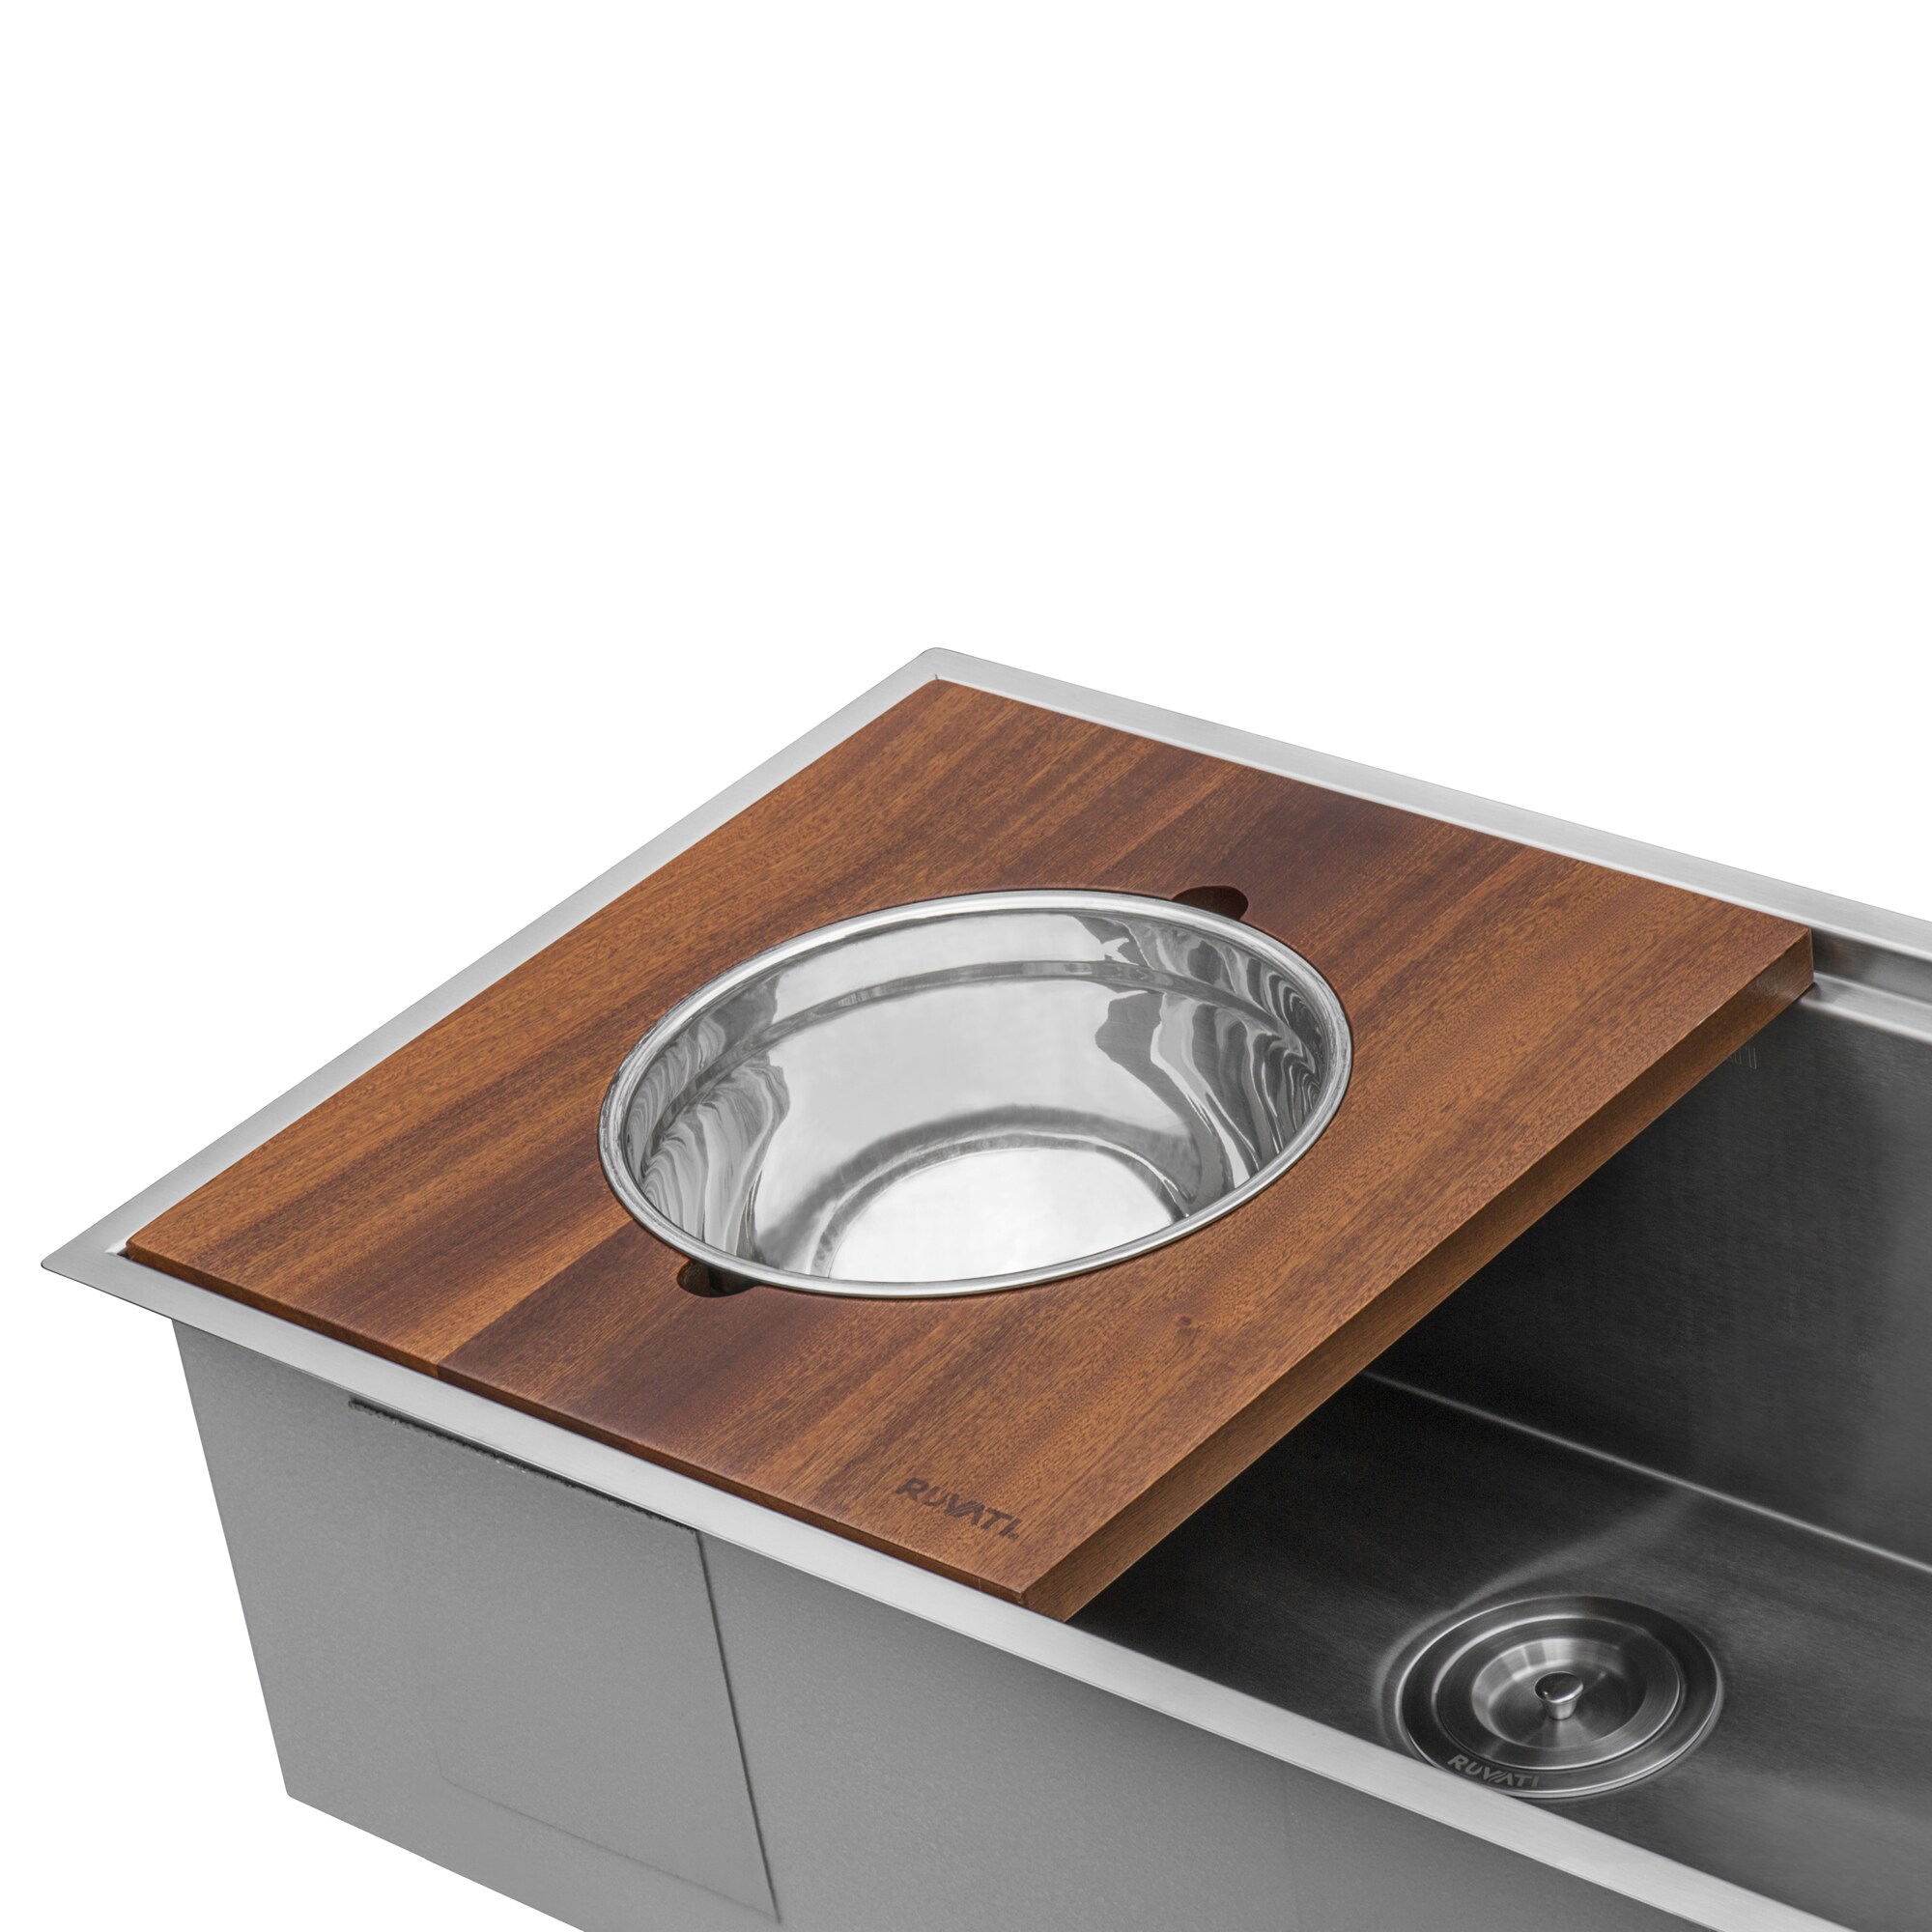 Kitchen Sink Accessory Kits at Lowes.com